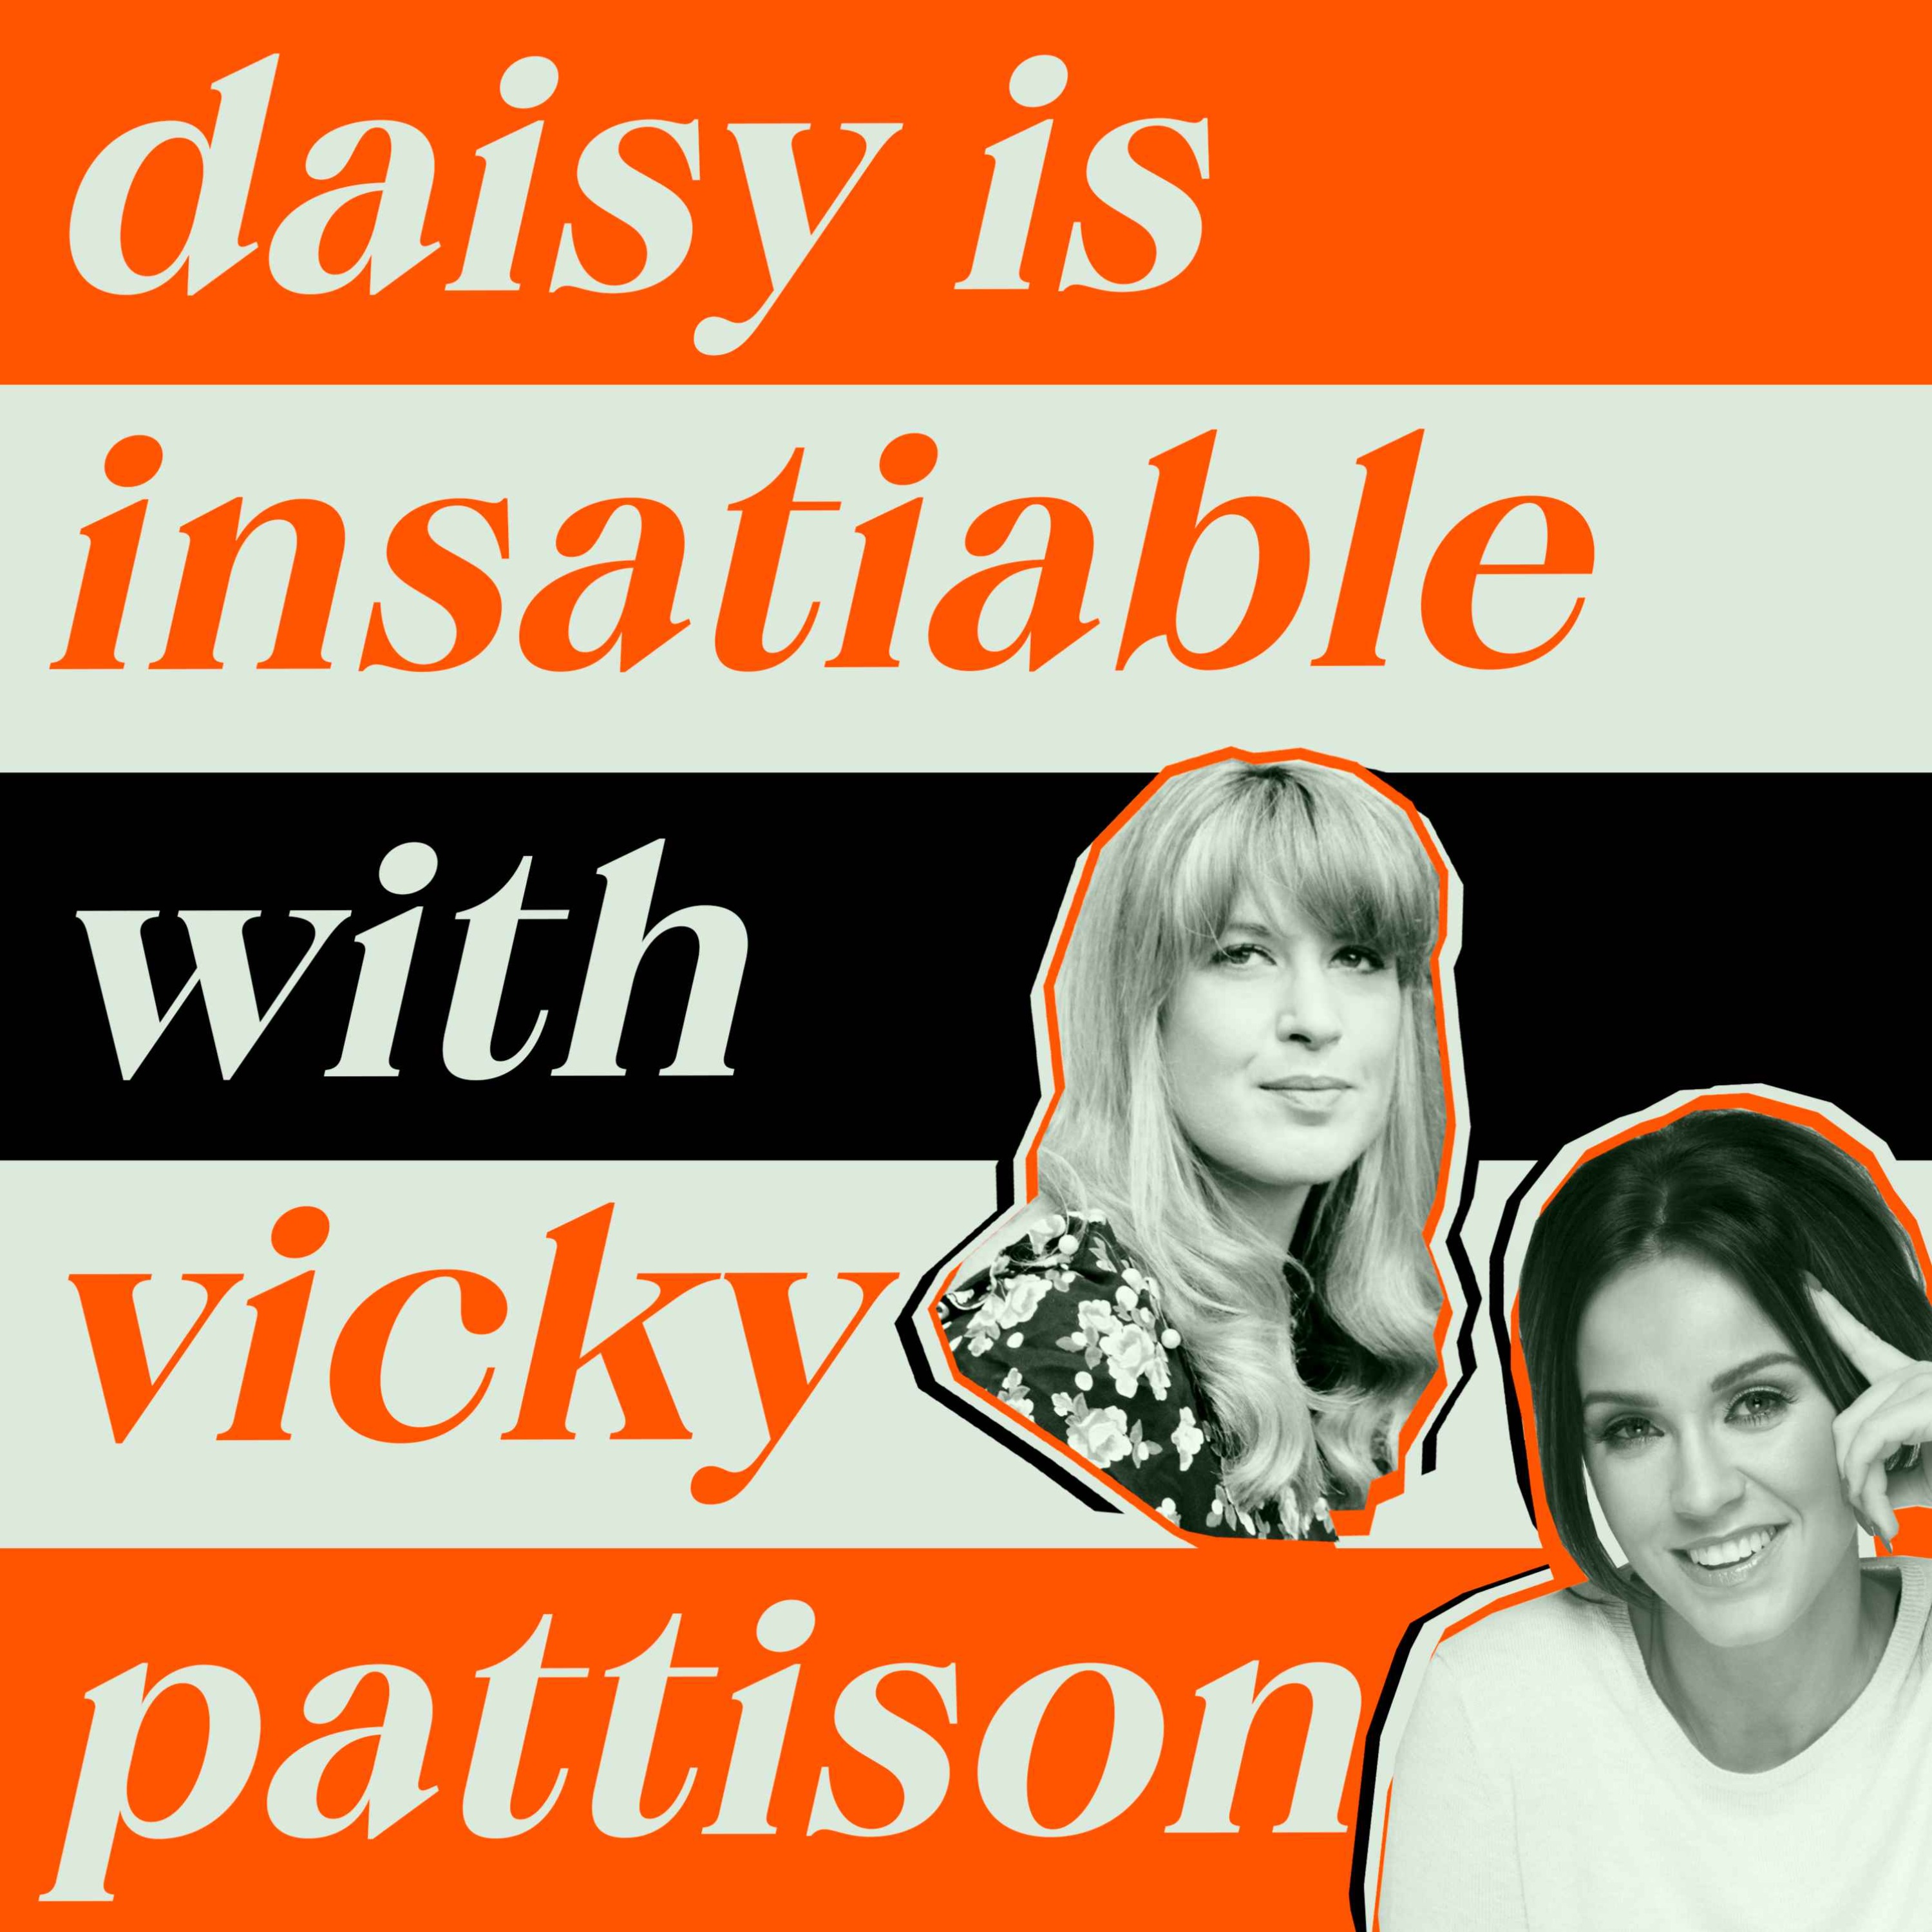 Daisy is Insatiable with Vicky Pattison